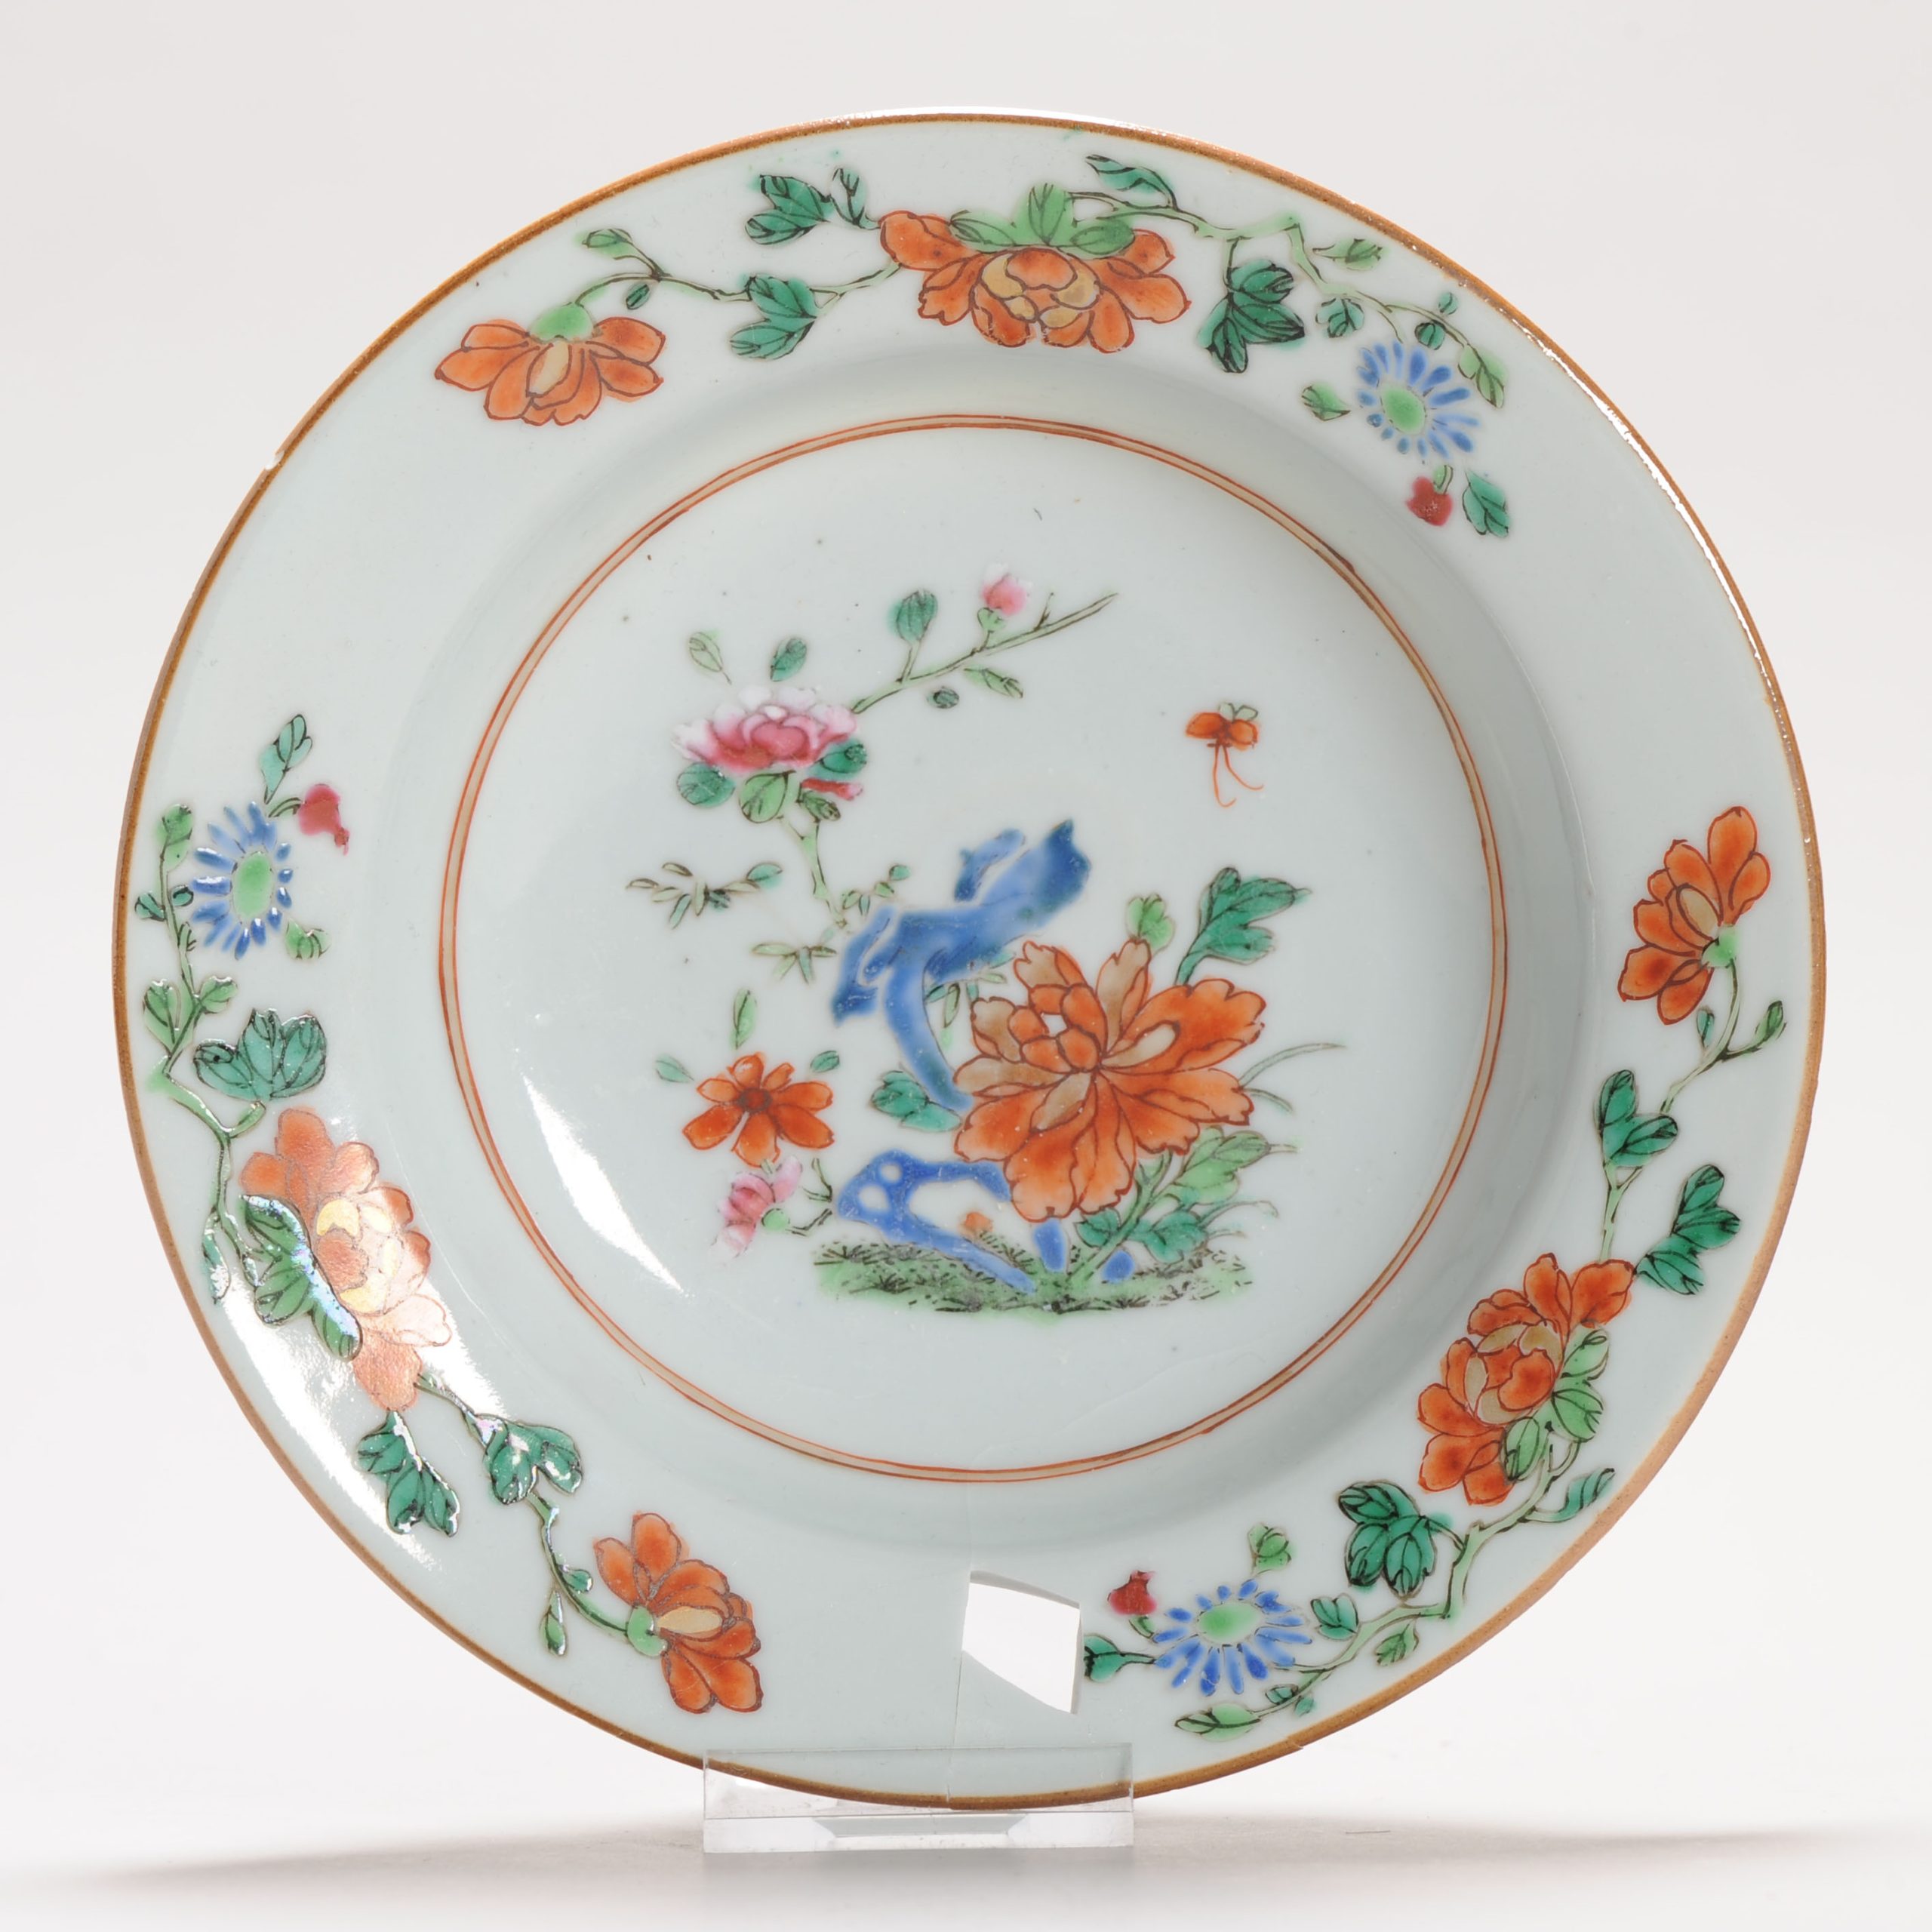 1273 A Famille Rose Small porridge plate with a scene of flowers